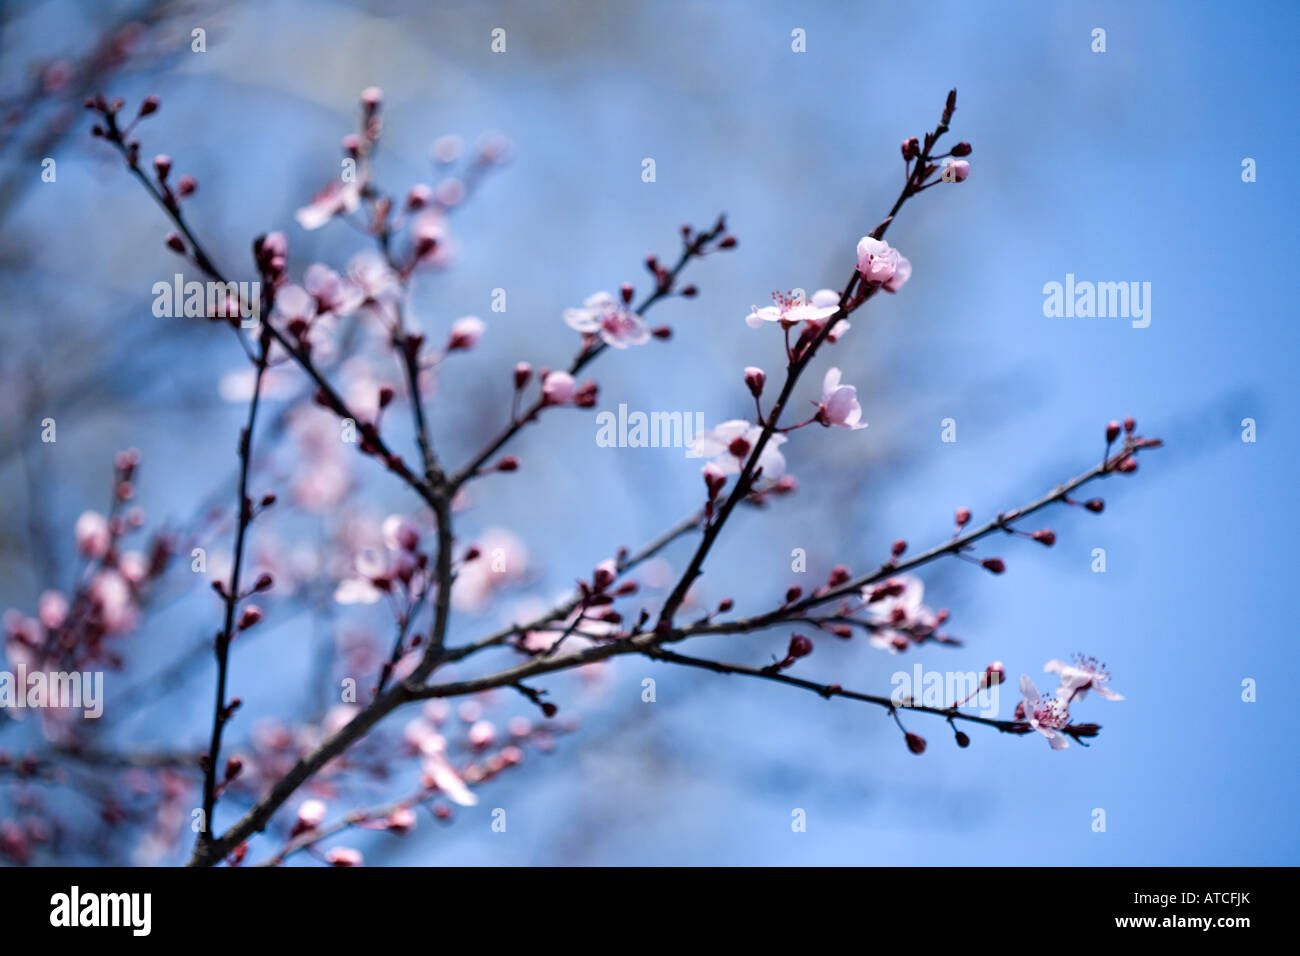 peach blossoms cherry blossoms bloom on tree branch in spring Stock Photo